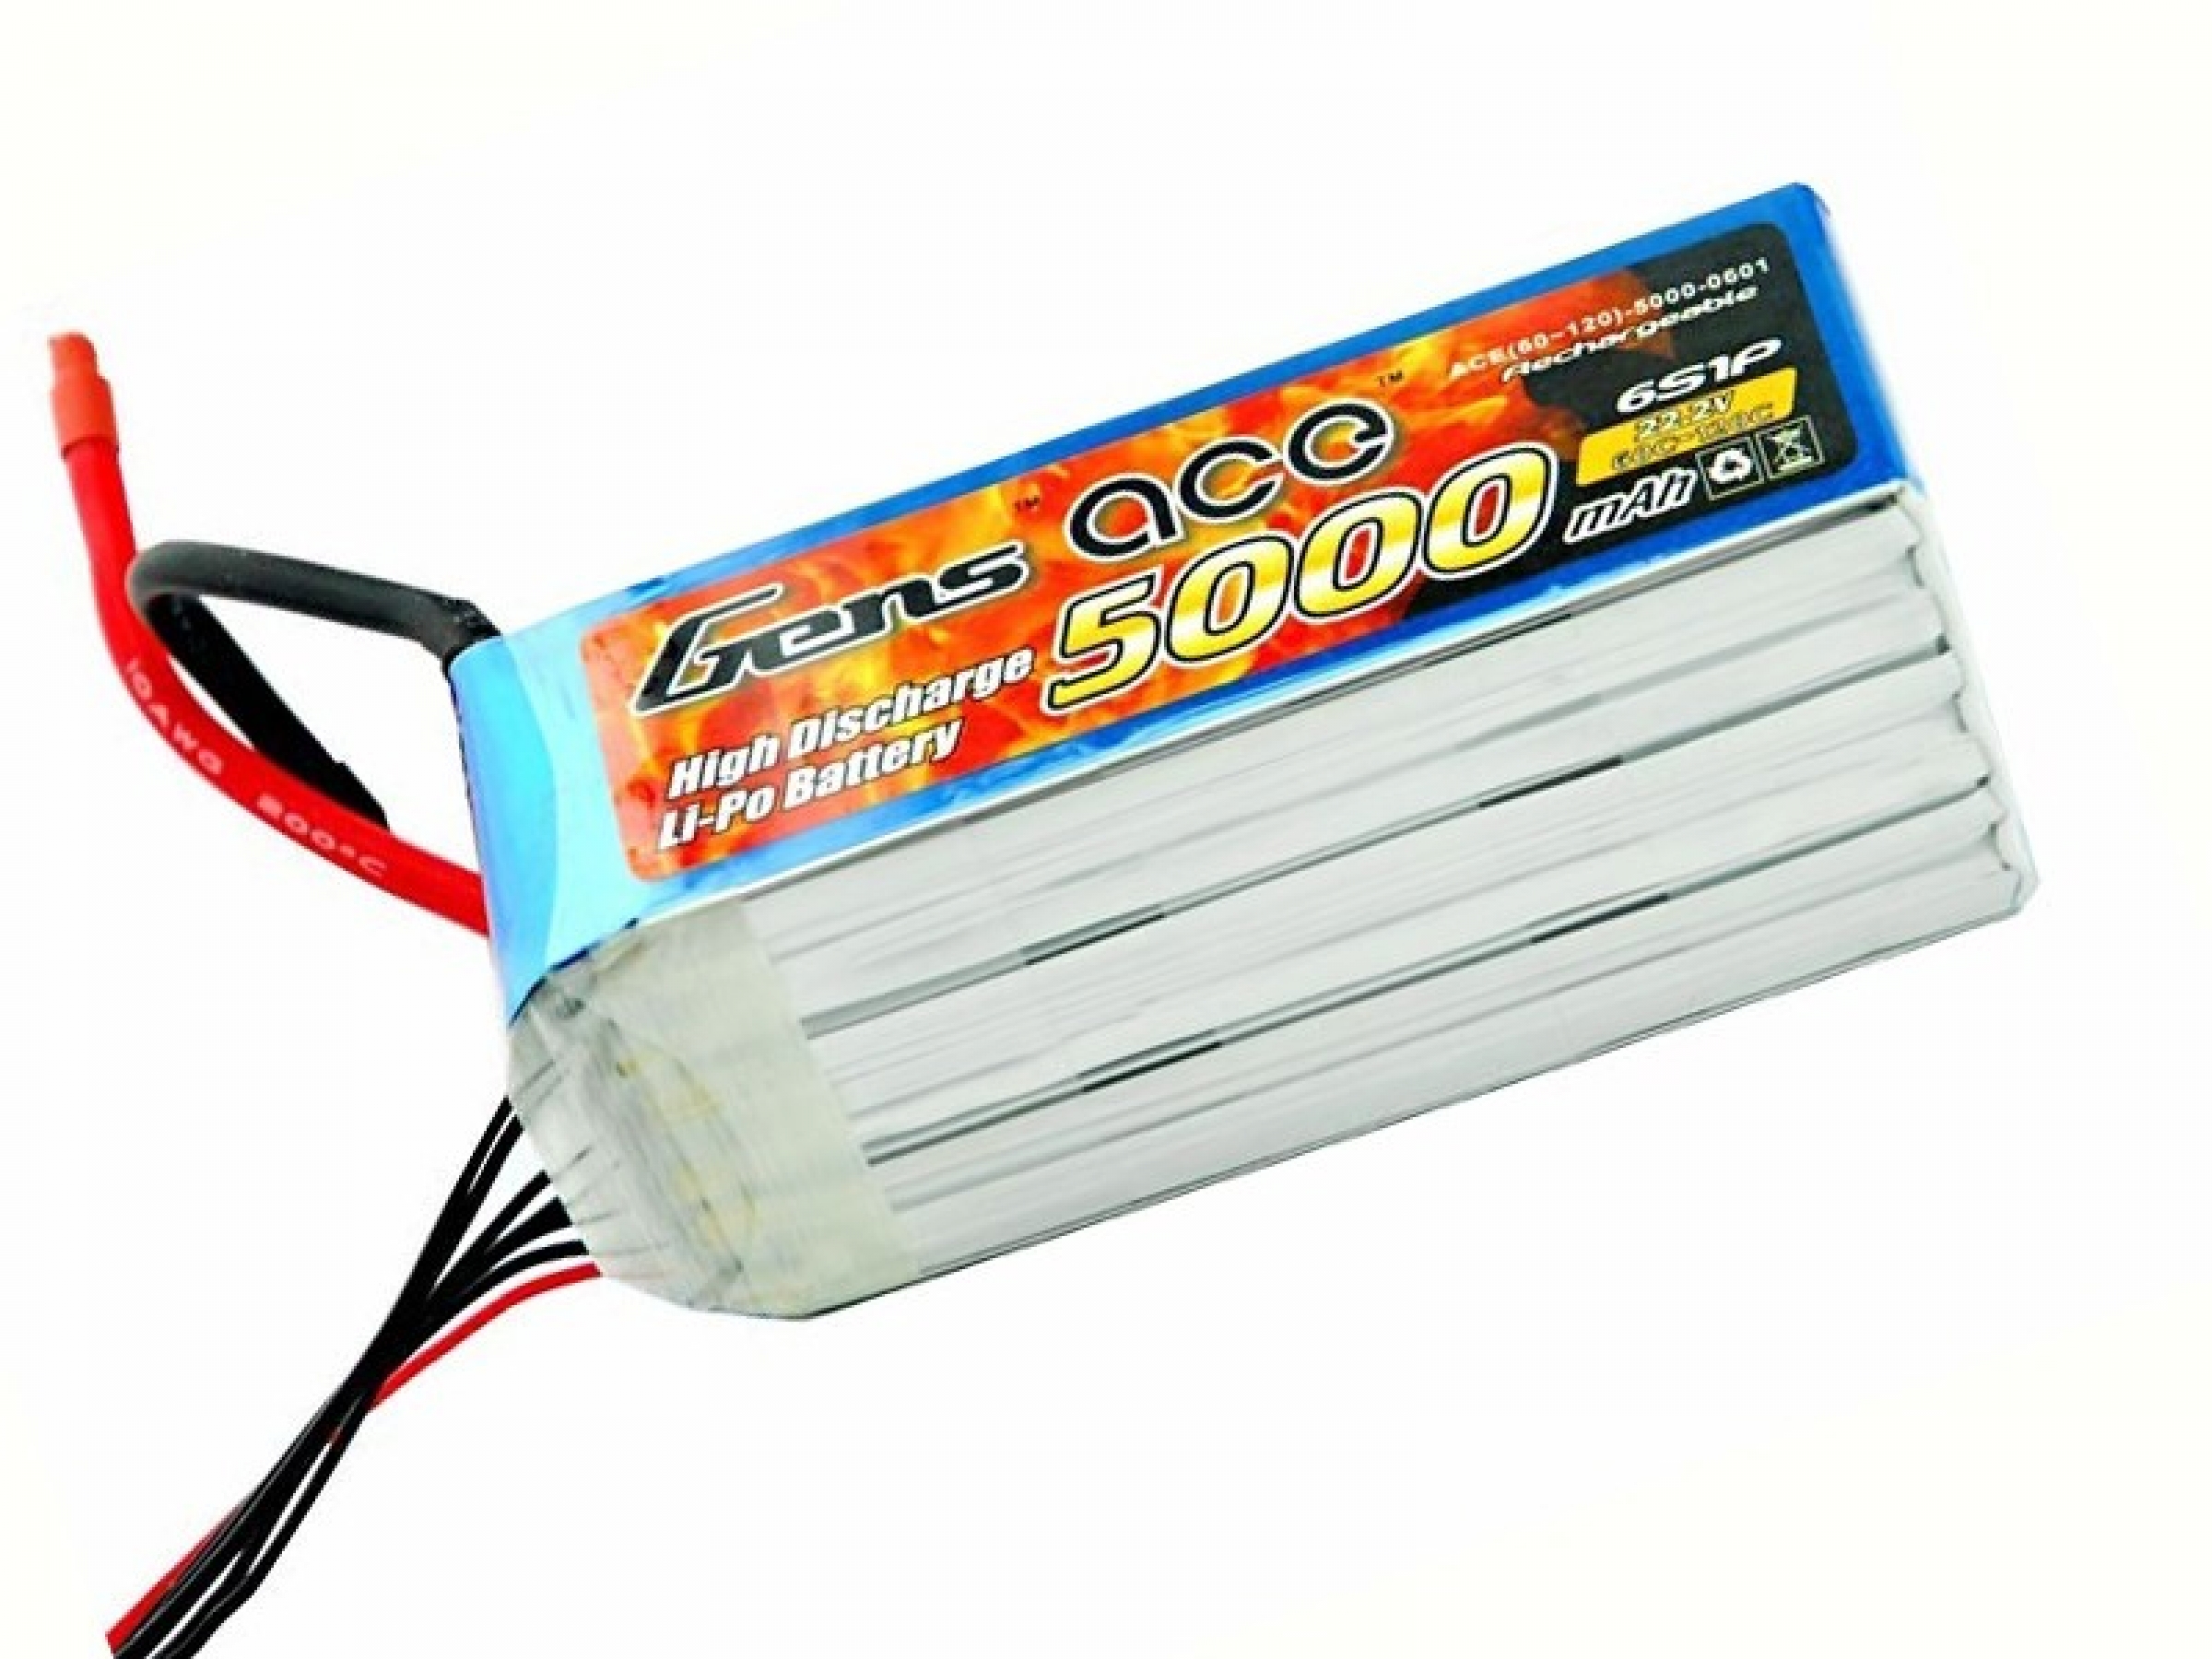 Grepow 6s 5000mah 60C Rc helicopter Lipo battery with EC5 connector